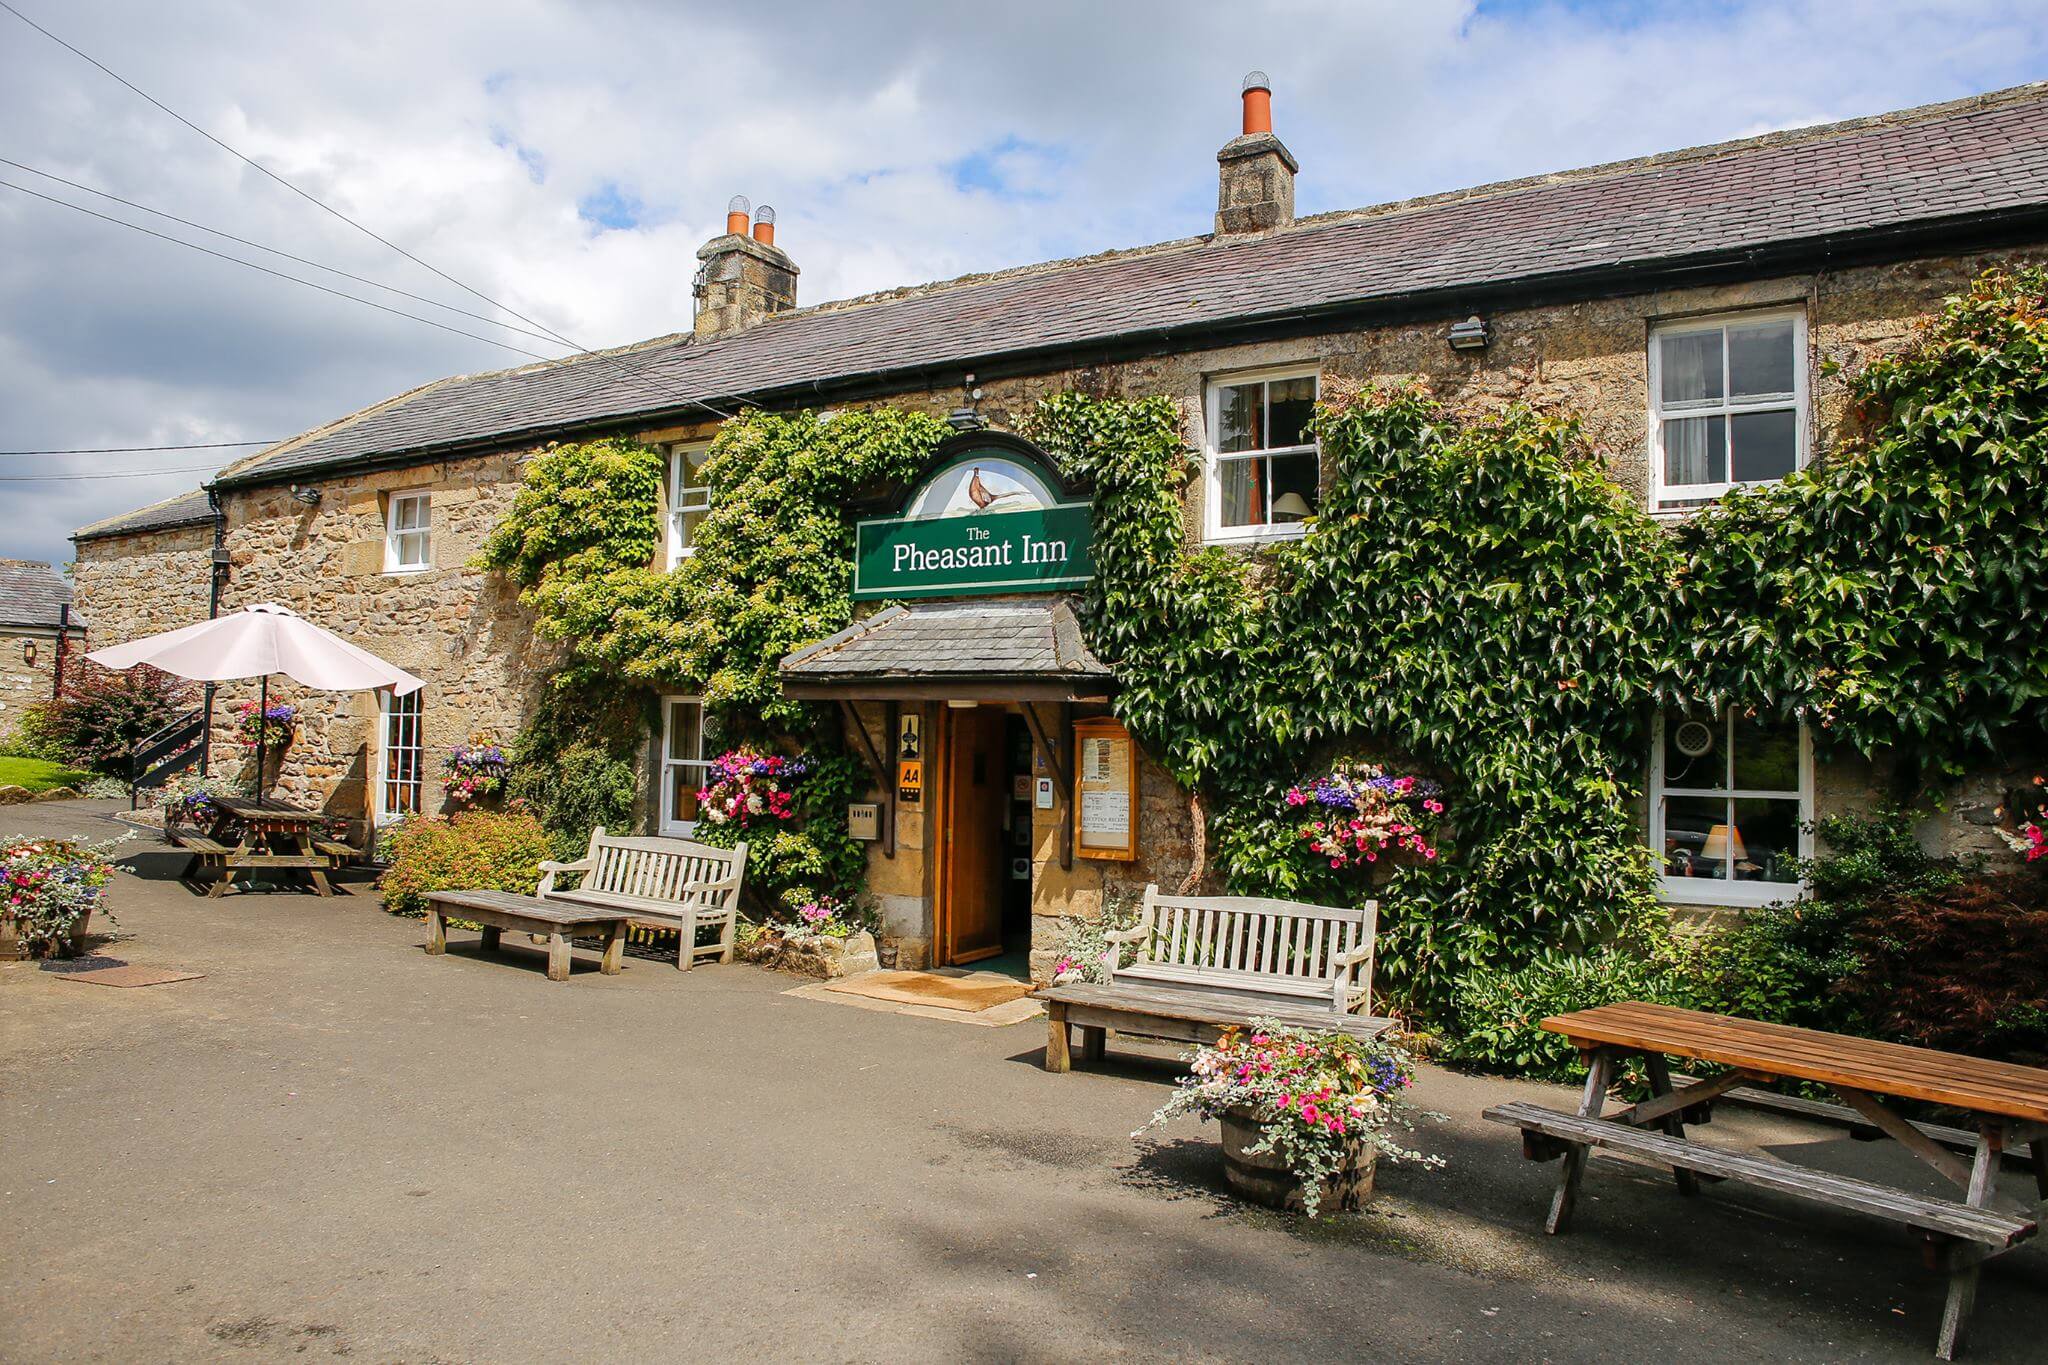 8 Best Pubs in Northumberland You NEED to Visit